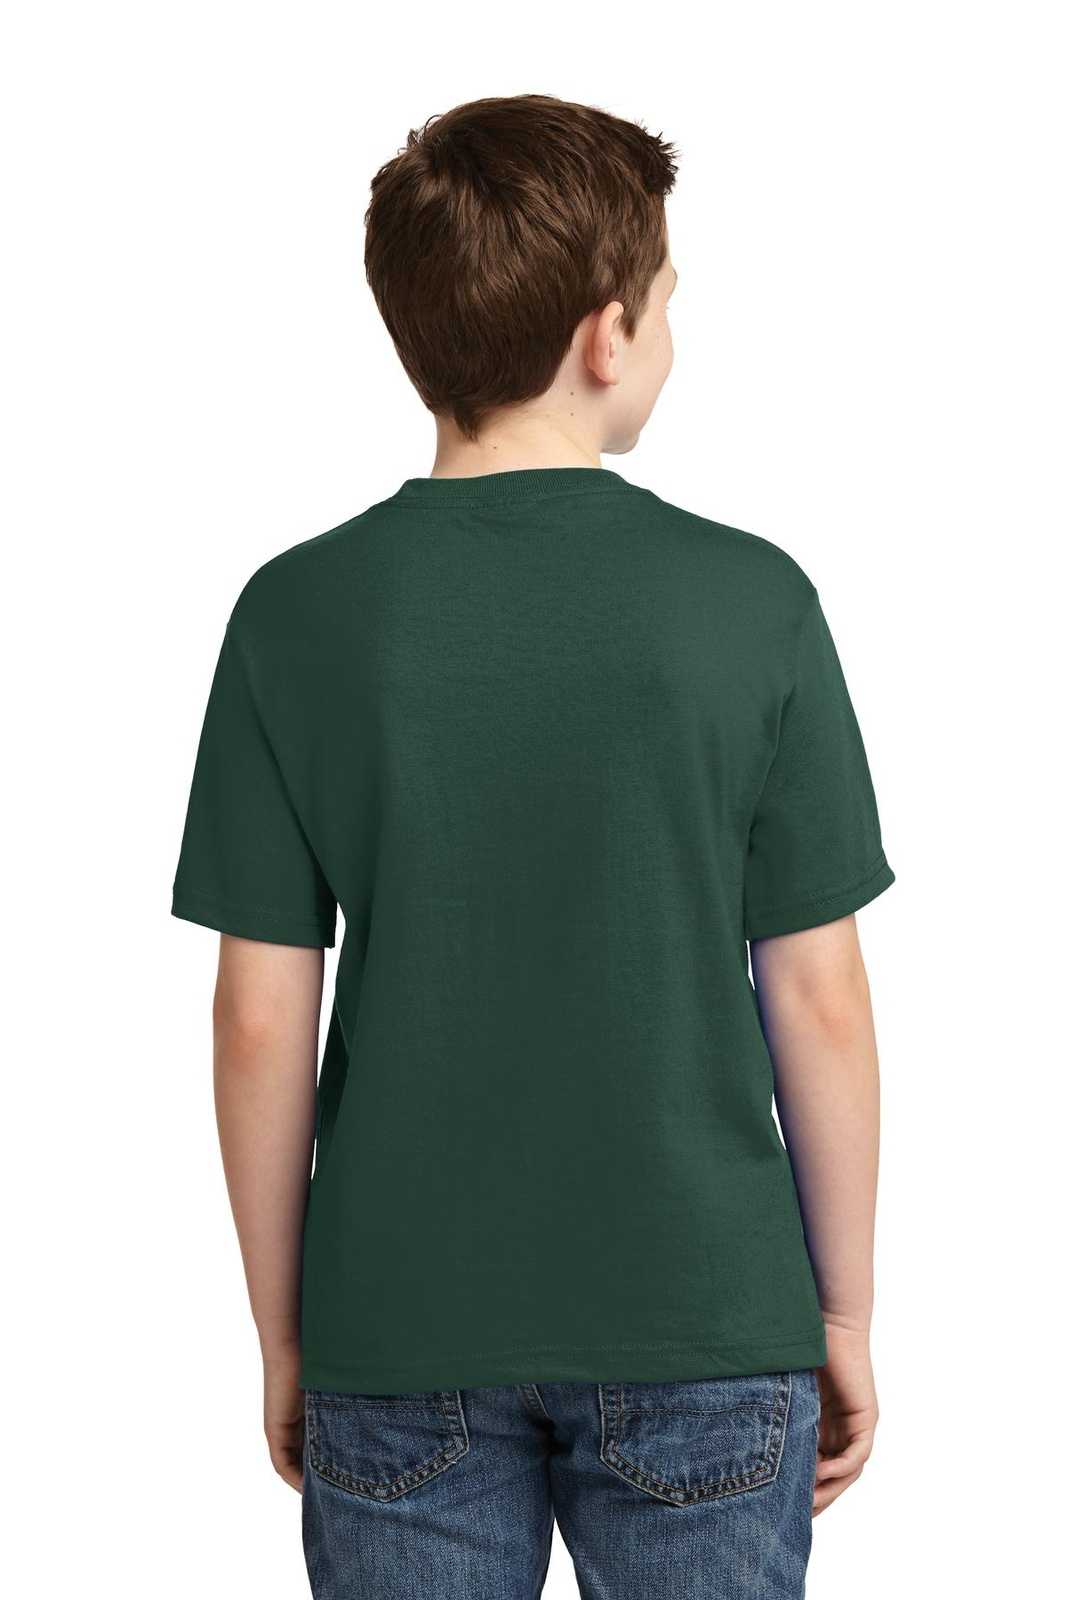 Jerzees 29B Youth Dri-Power 50/50 Cotton/Poly T-Shirt - Forest Green - HIT a Double